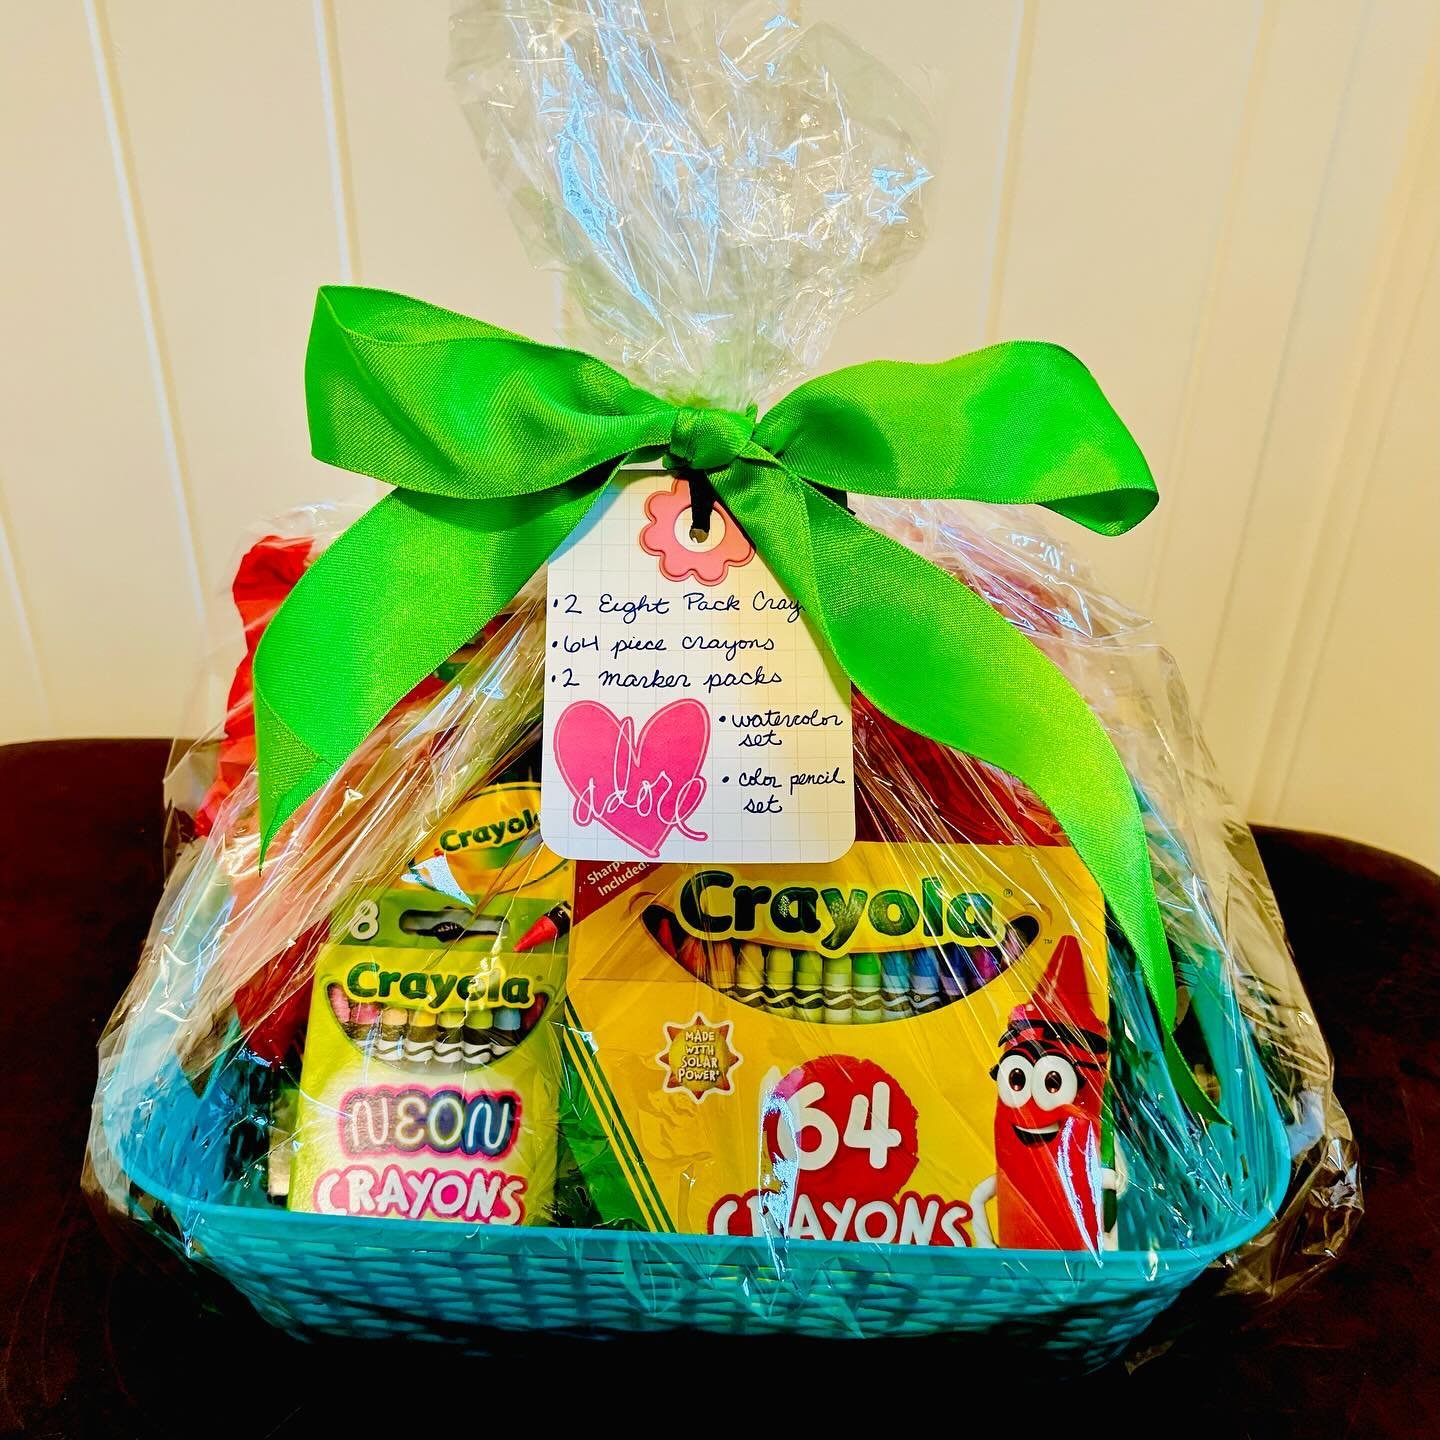 Don&rsquo;t forget our raffle is going on until GIVE BIG KERN day, May 7! Tickets are only $1 each and can be bought online for any of the baskets seen here or buy a block and we&rsquo;ll put a few in each basket. Click the link in our bio for ticket